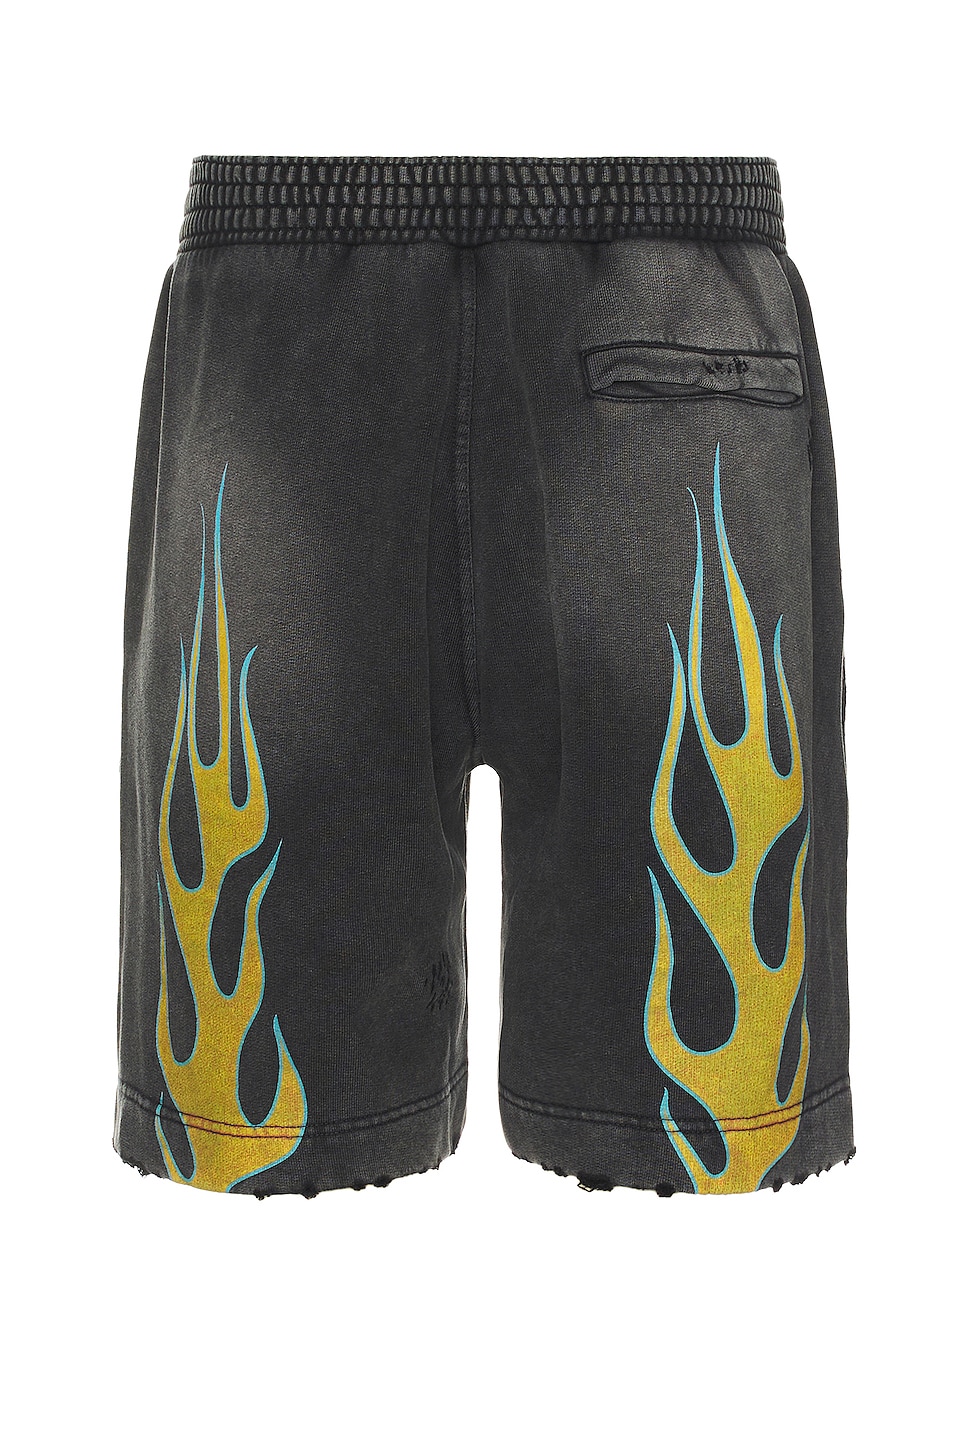 Image 1 of Givenchy New Board Shorts in Black